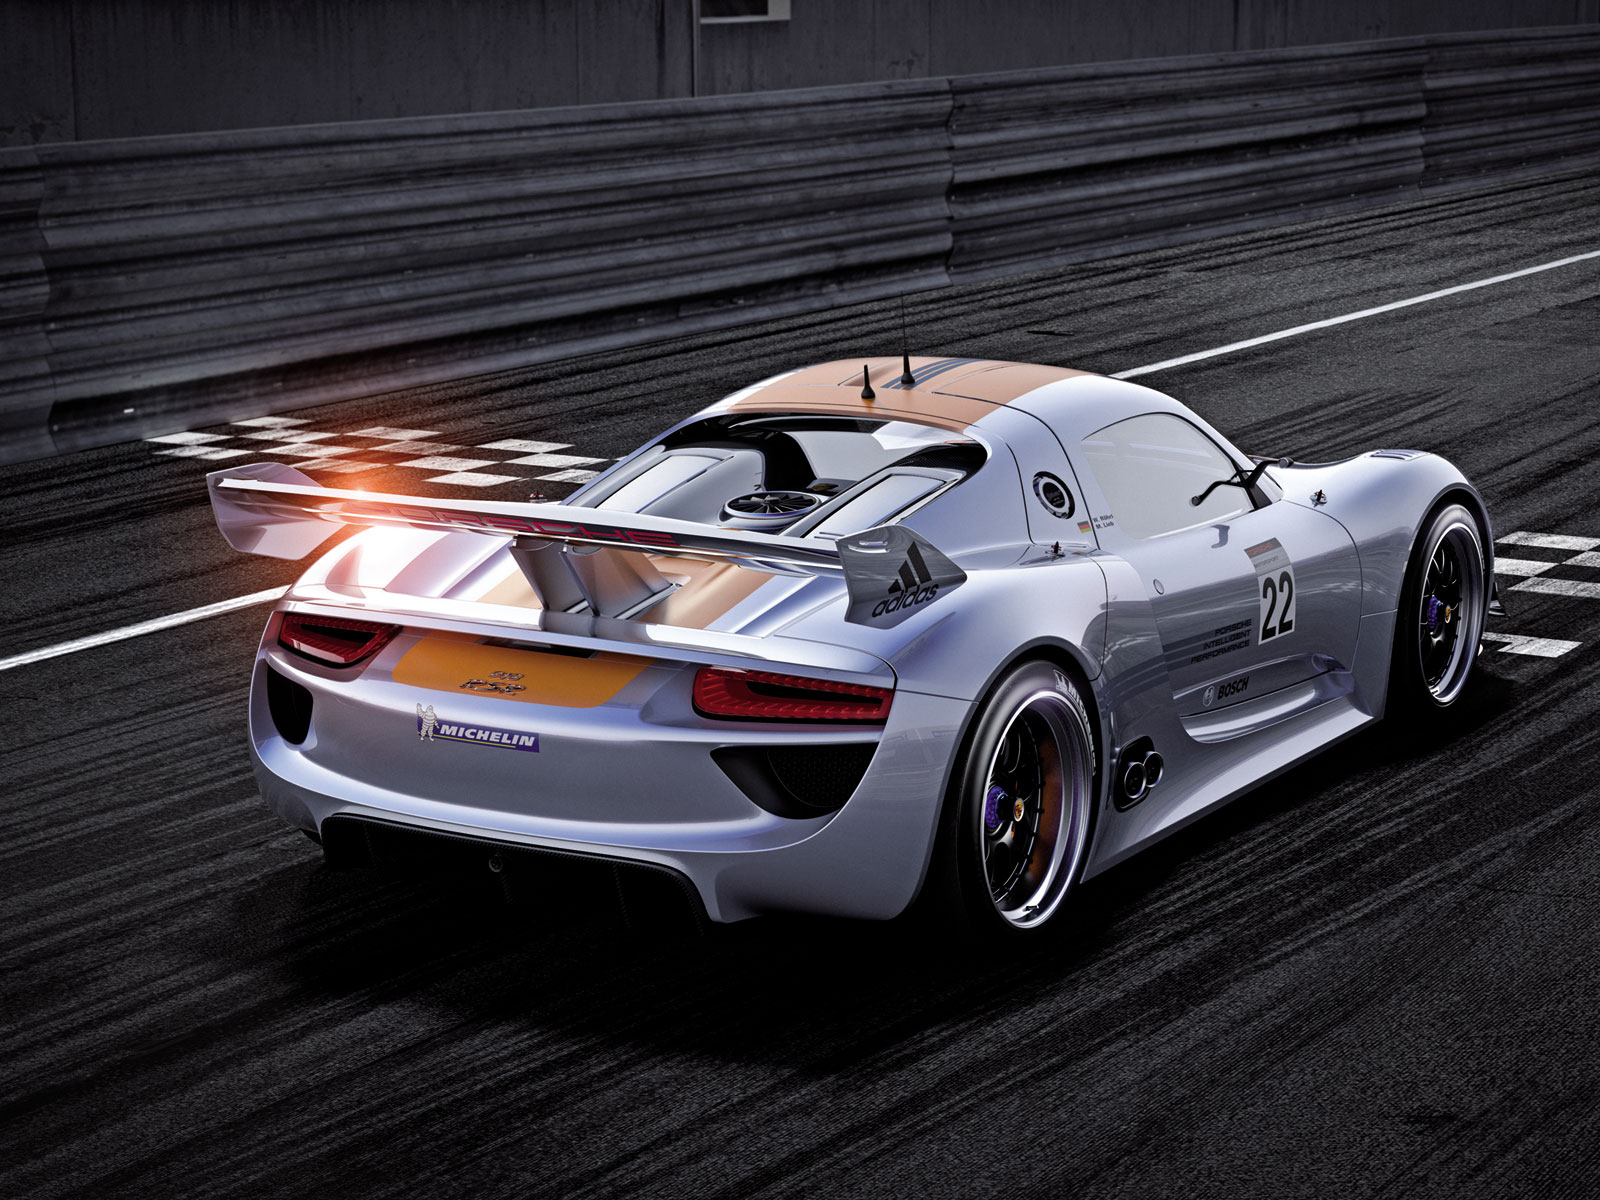 The new Porsche 918 RSR concept offers a V8 engine able to develop 563 